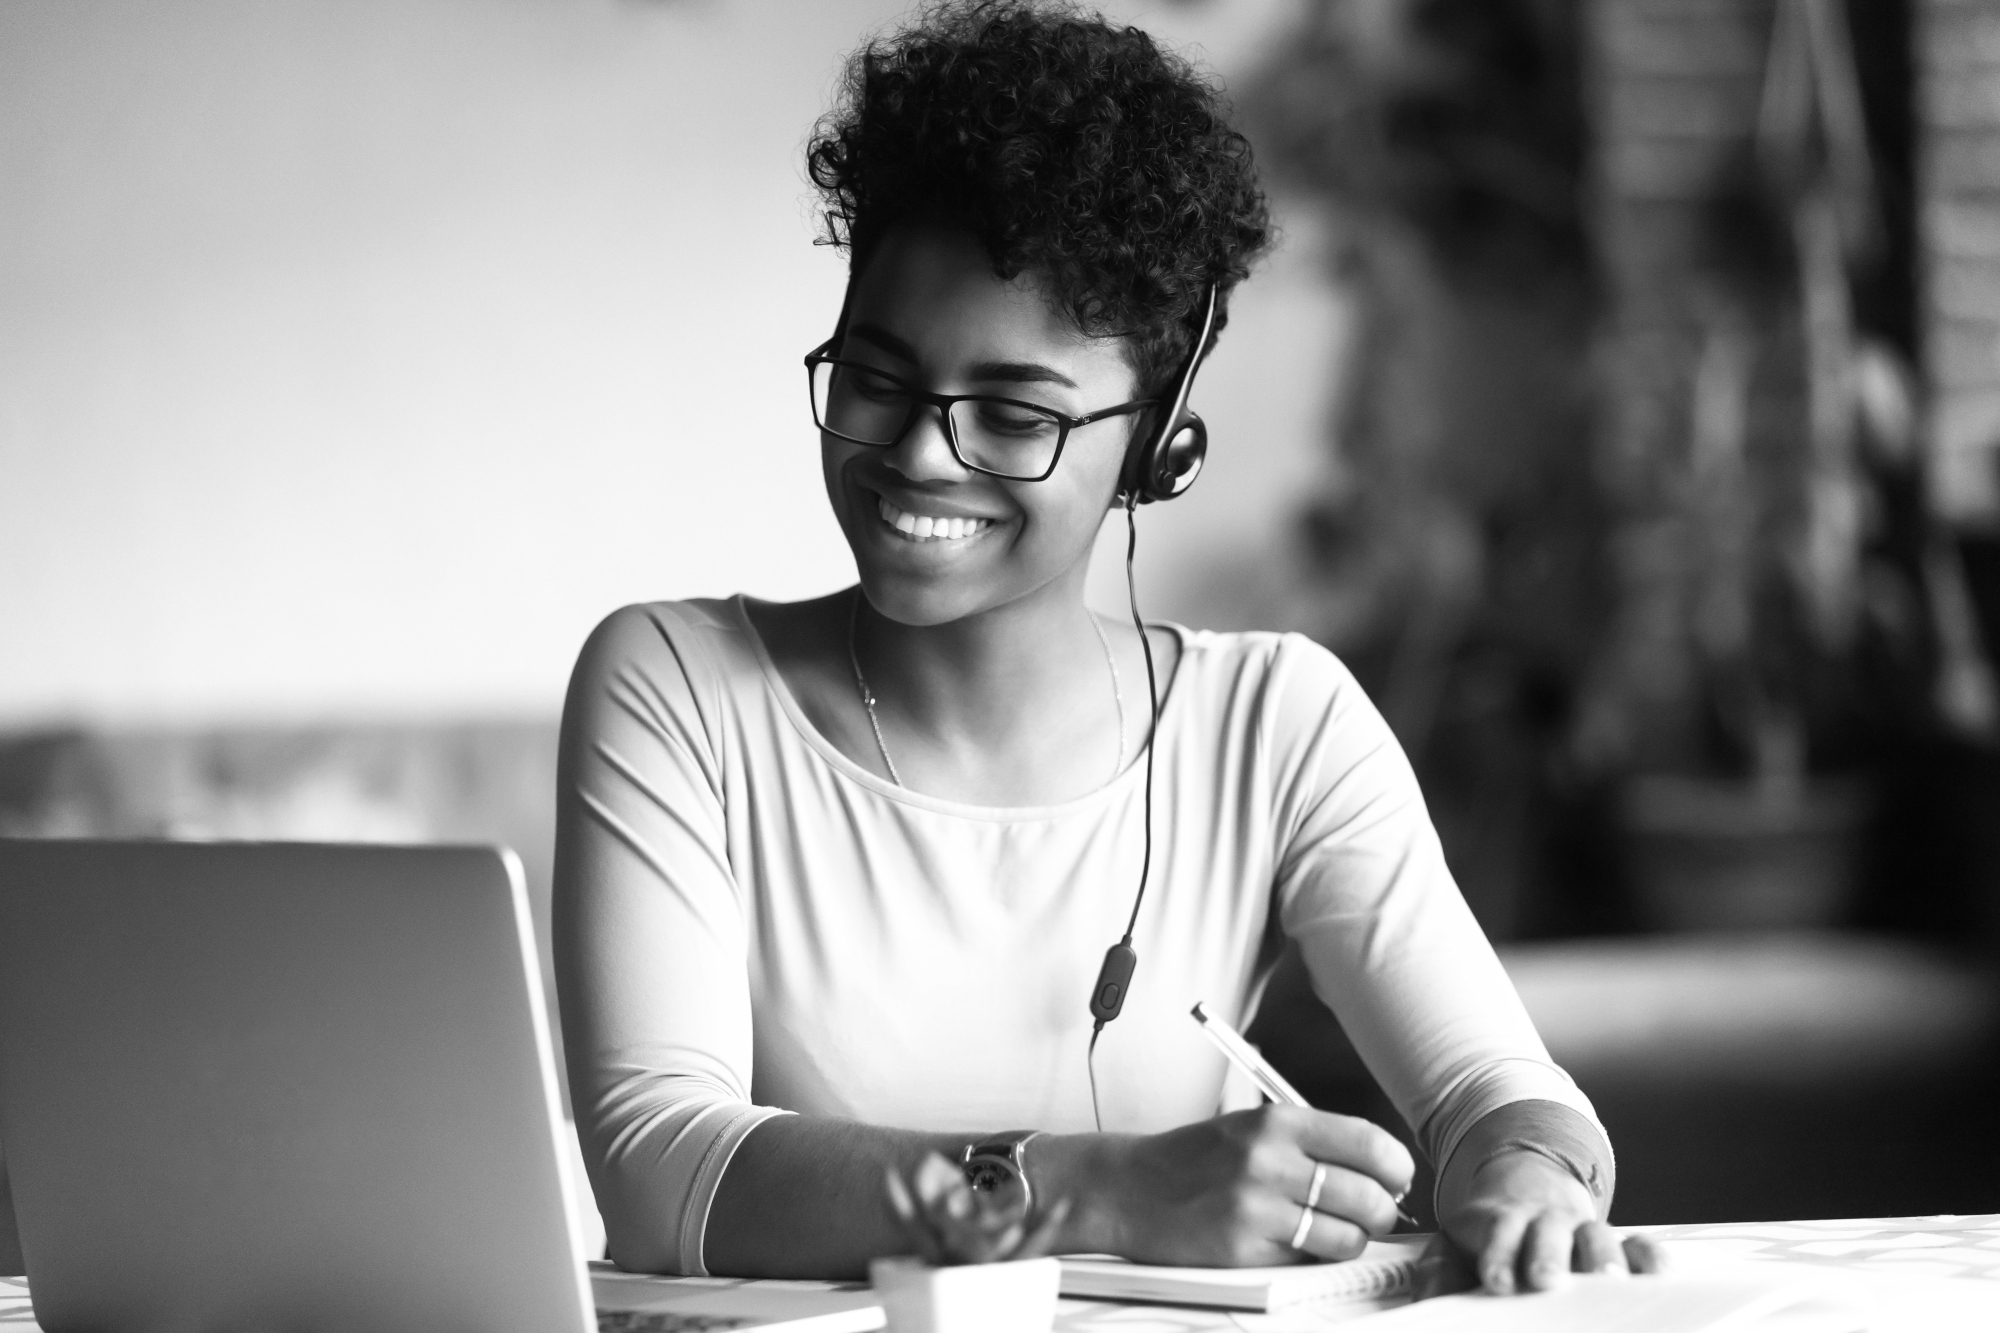 Grayscale photo of a young student of color wearing glasses, headphones, and smiling at a laptop while taking notes.